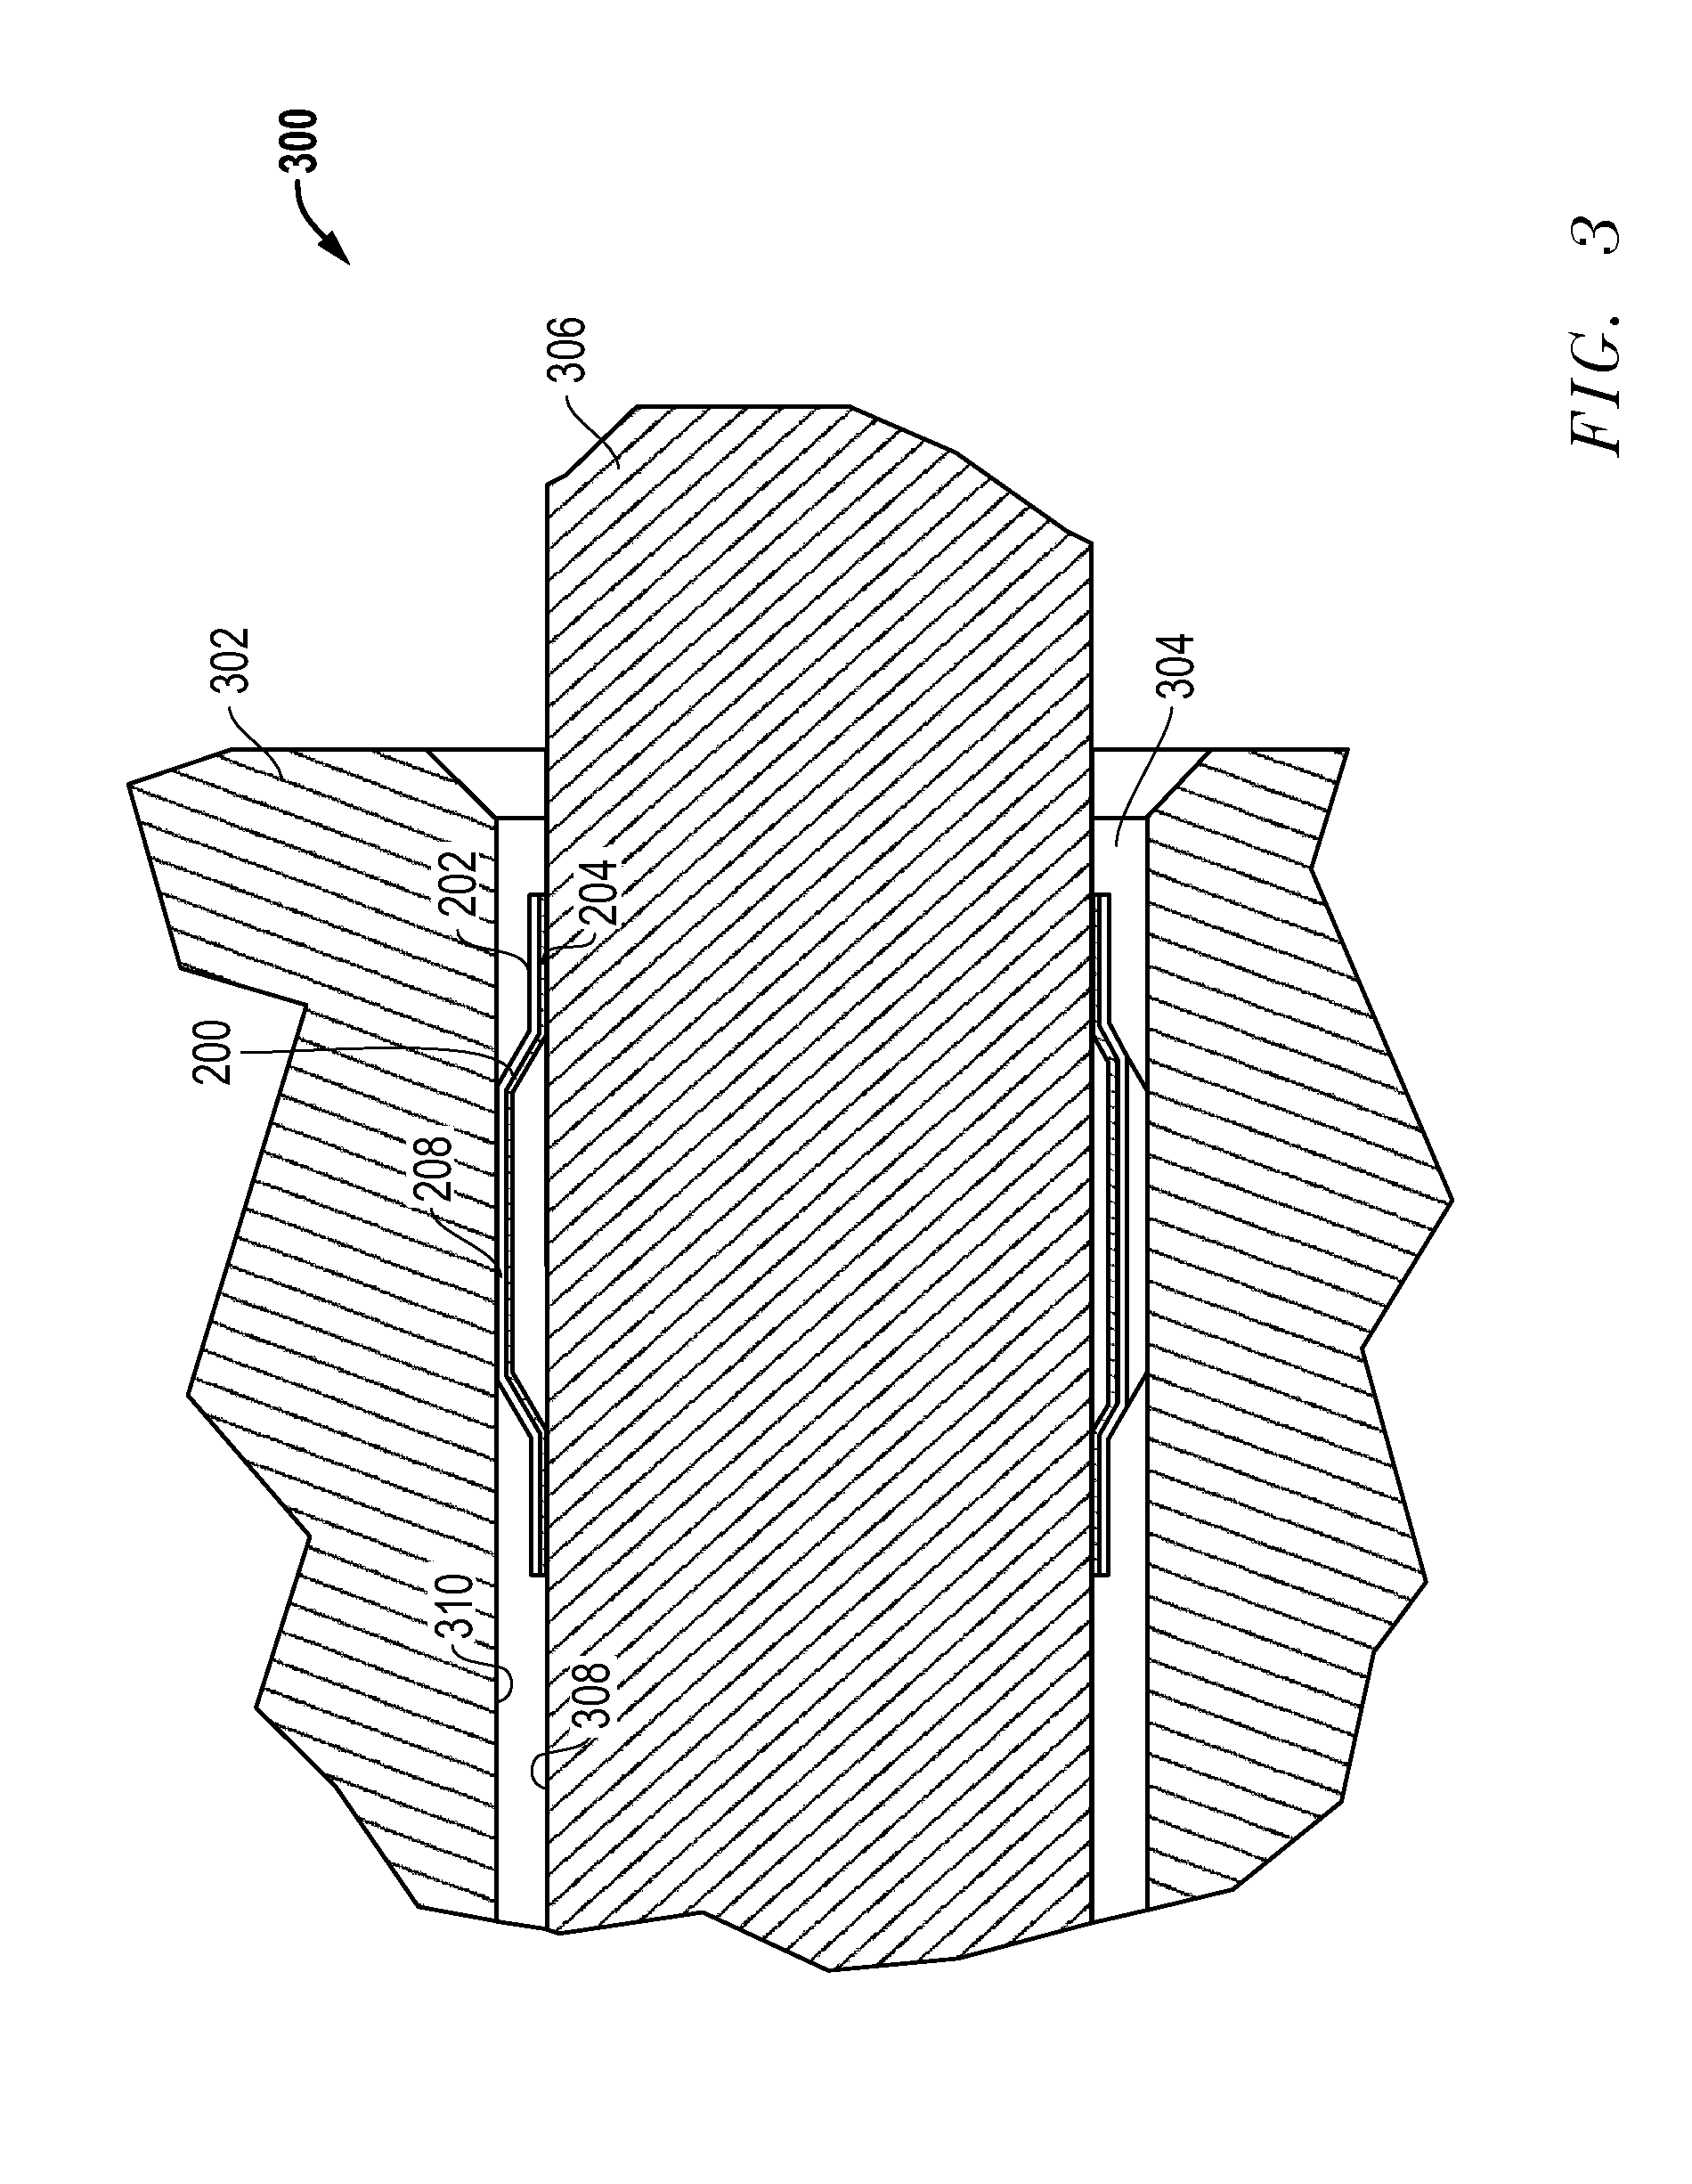 System, method and apparatus for tolerance ring control of slip interface sliding forces